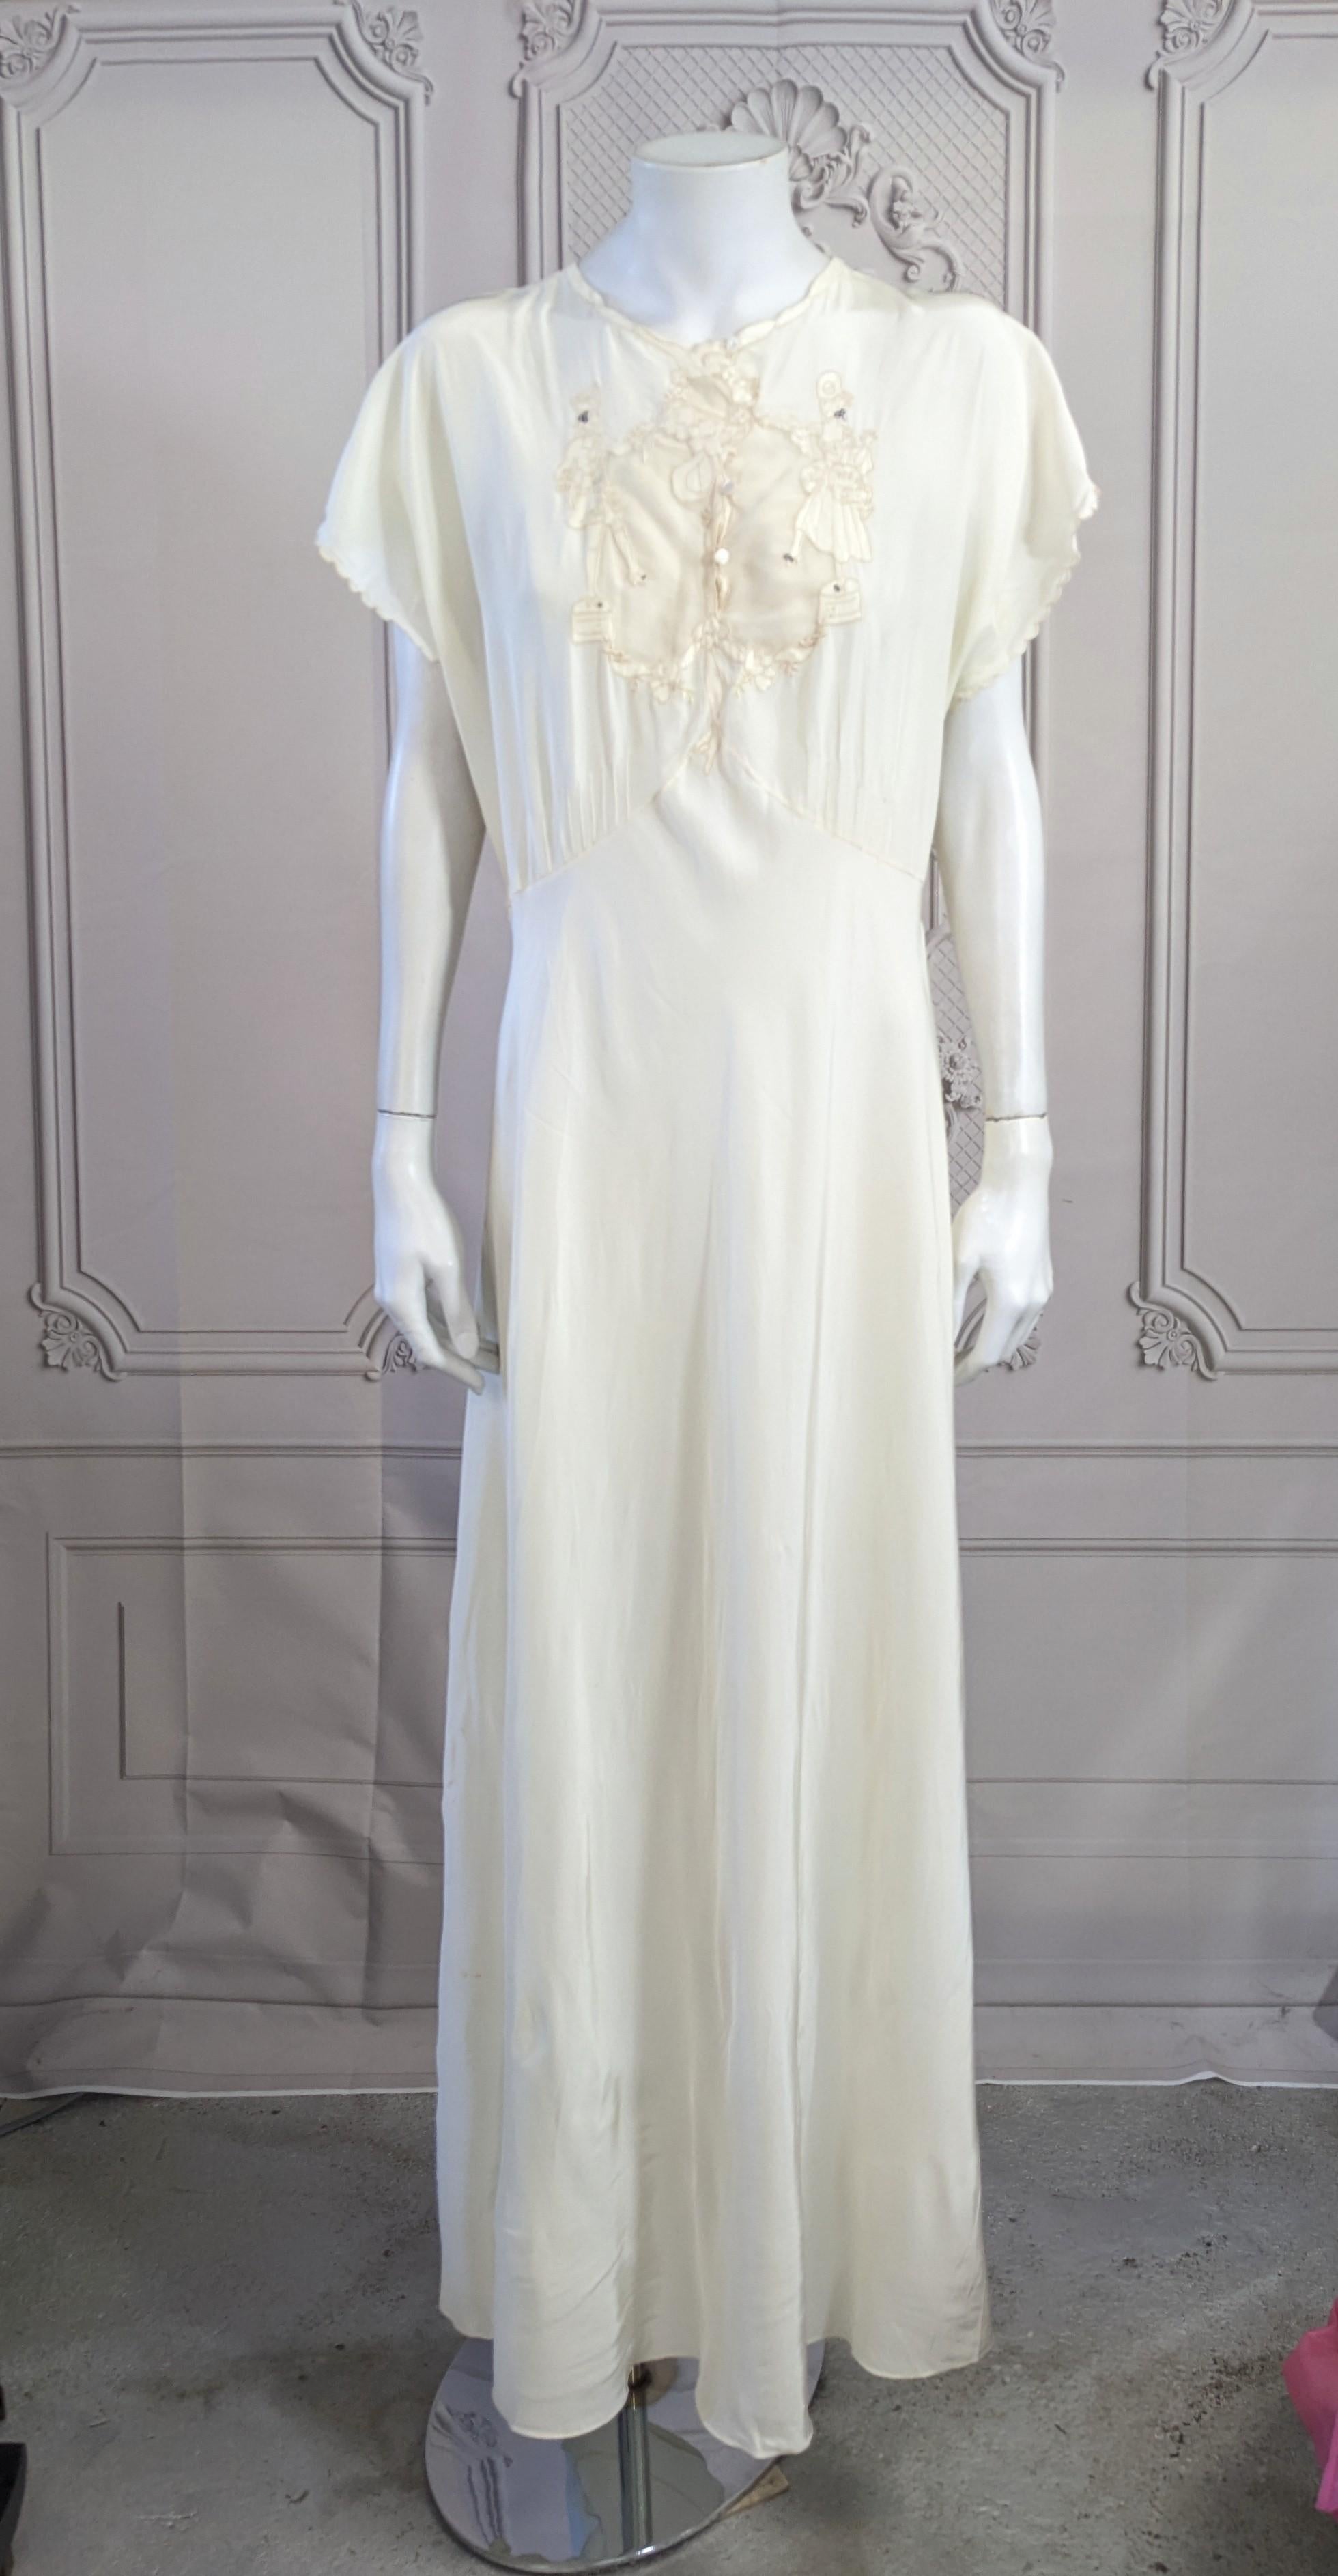 Charming and unusual Ivory Slip Dress with Courtesan Embroideries from the 1940's. Elaborate 18th Century dancing courtesans in satin are hand embroidered on bodice with sheer area over bust and tiny pearl buttons. Rayon bias cut body and tiny